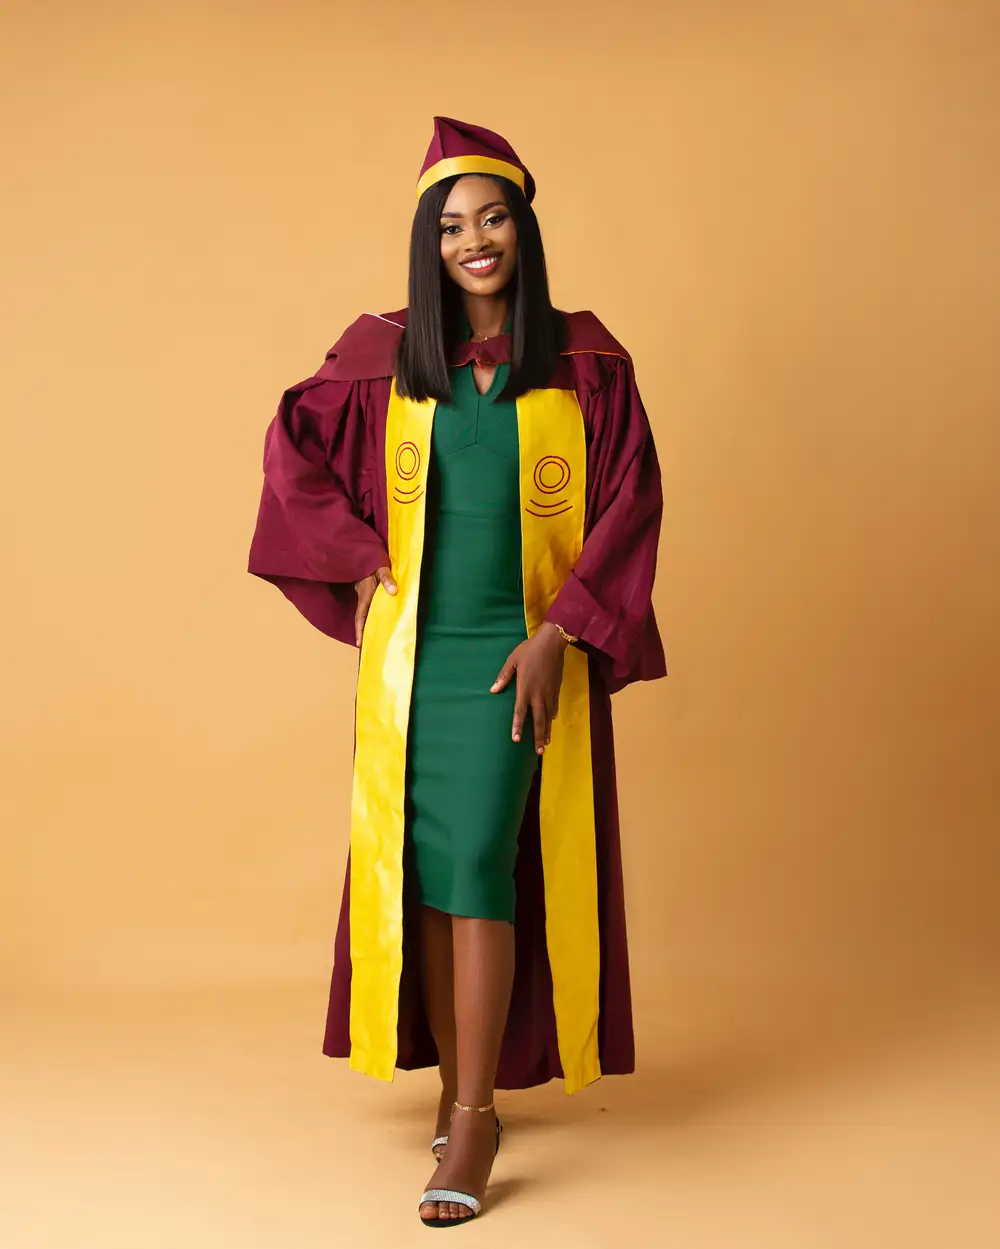 woman in a graduation gown